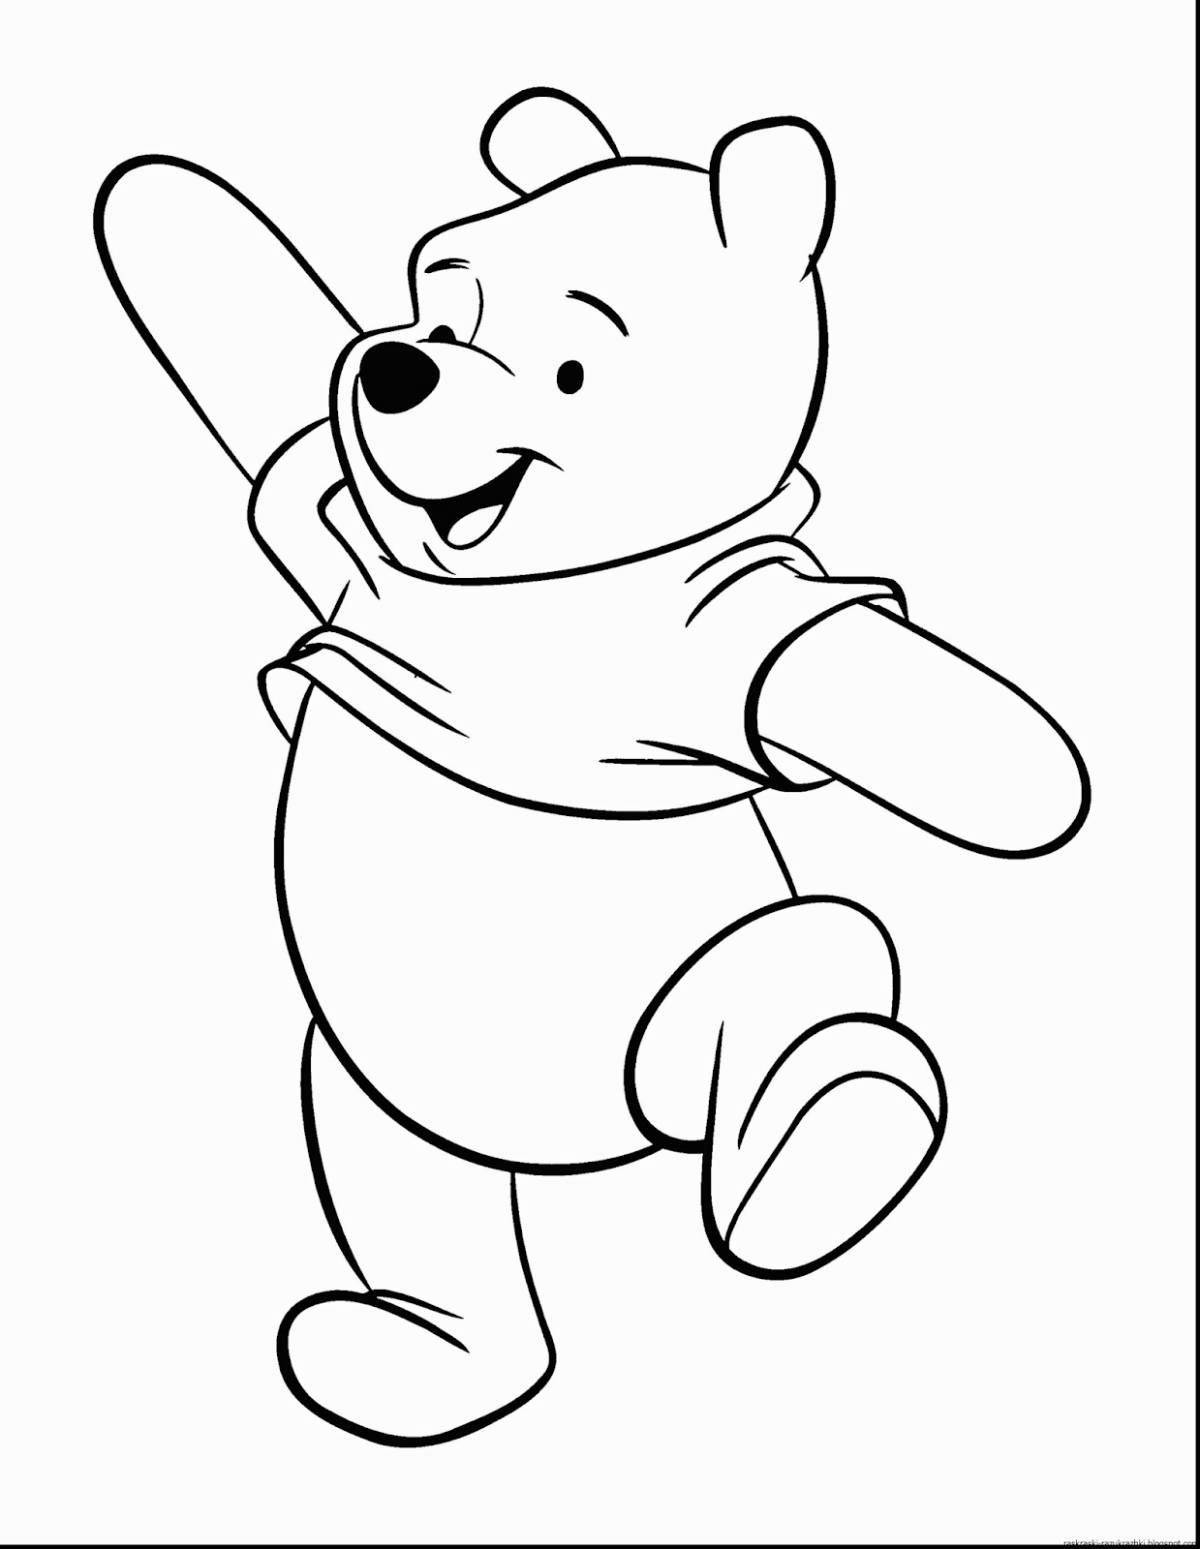 Coloring pages with outstanding cartoon characters for children